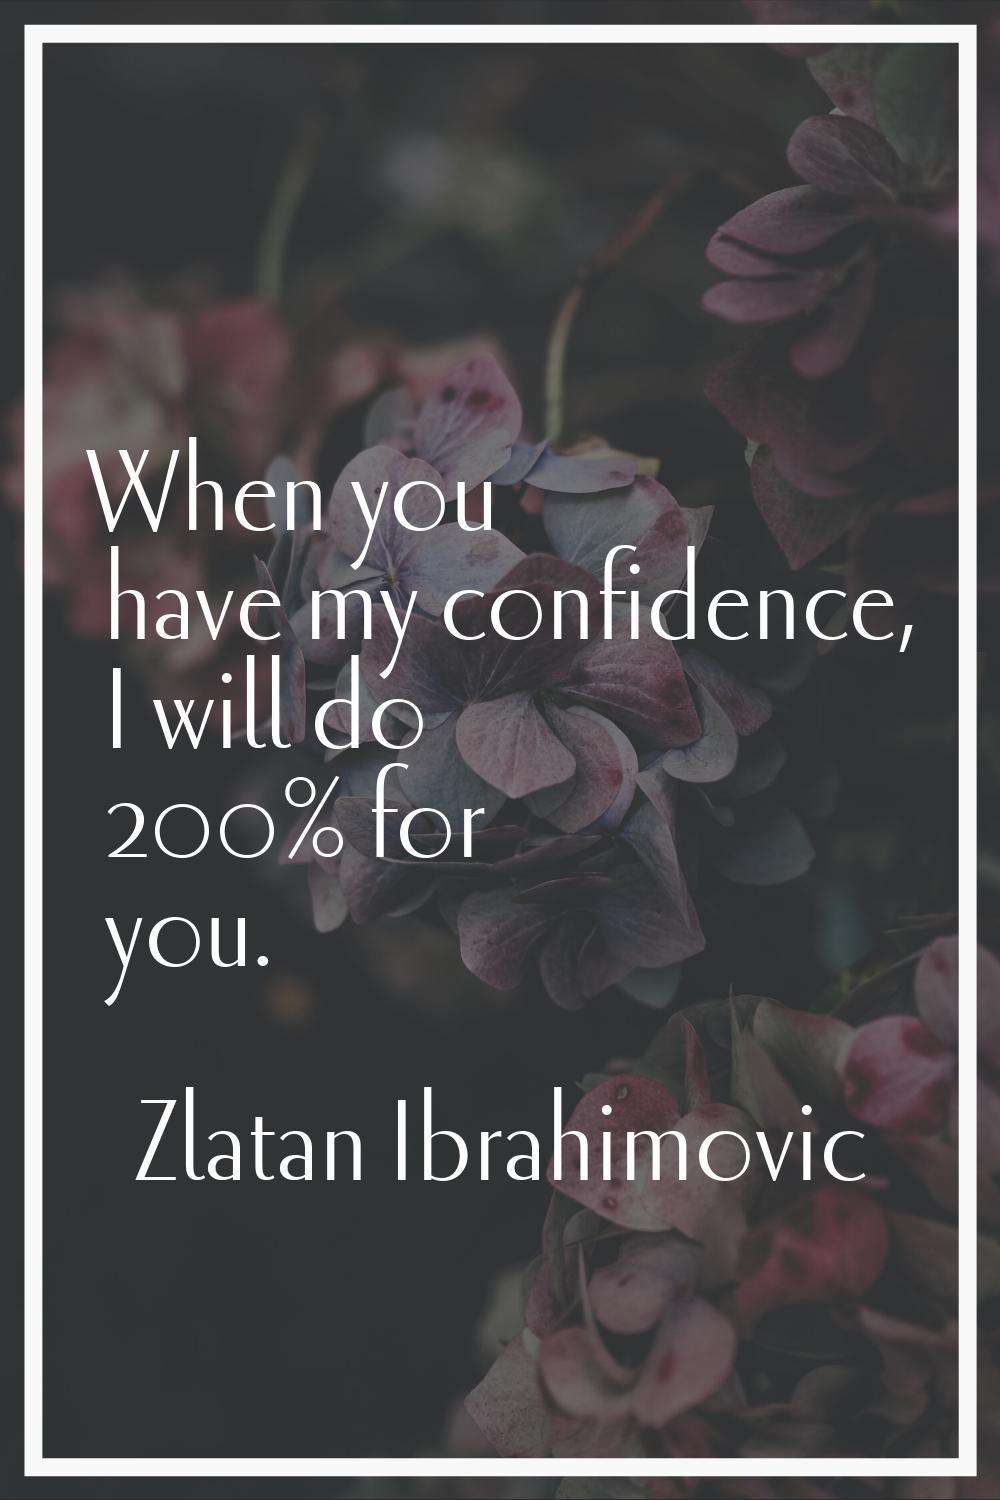 When you have my confidence, I will do 200% for you.